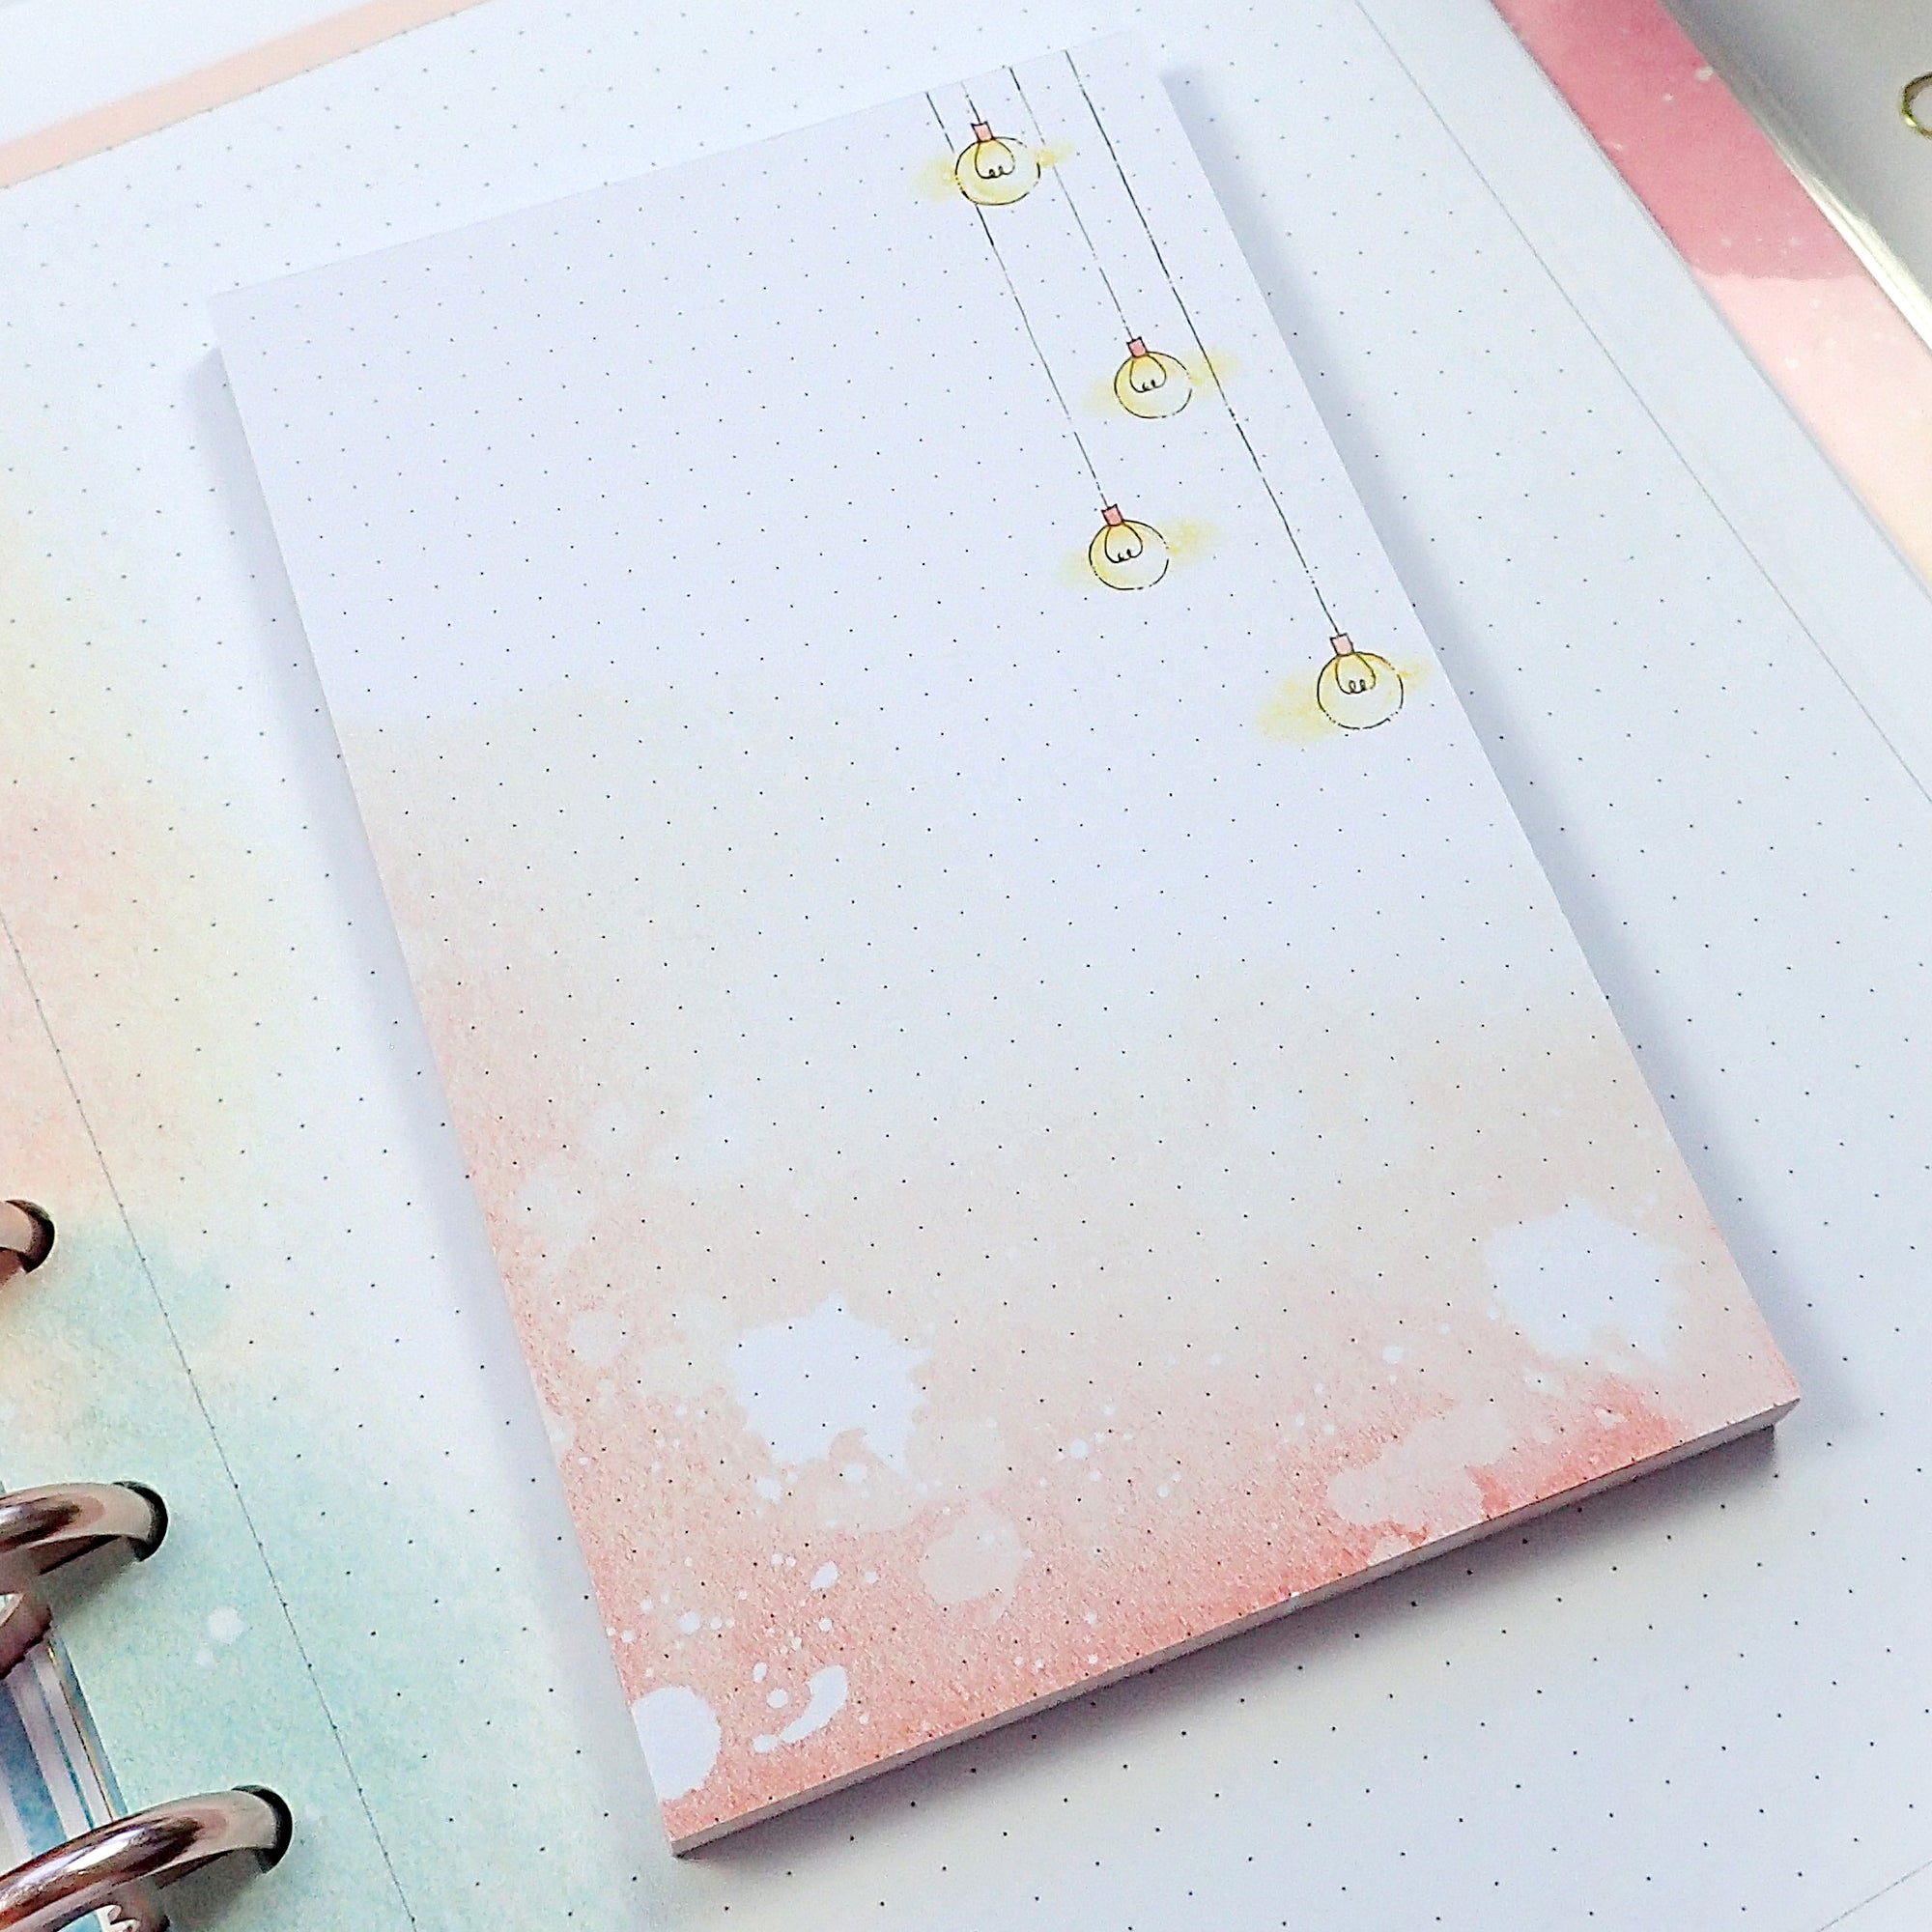 Pocket sized notepad with bullet journal dots pattern